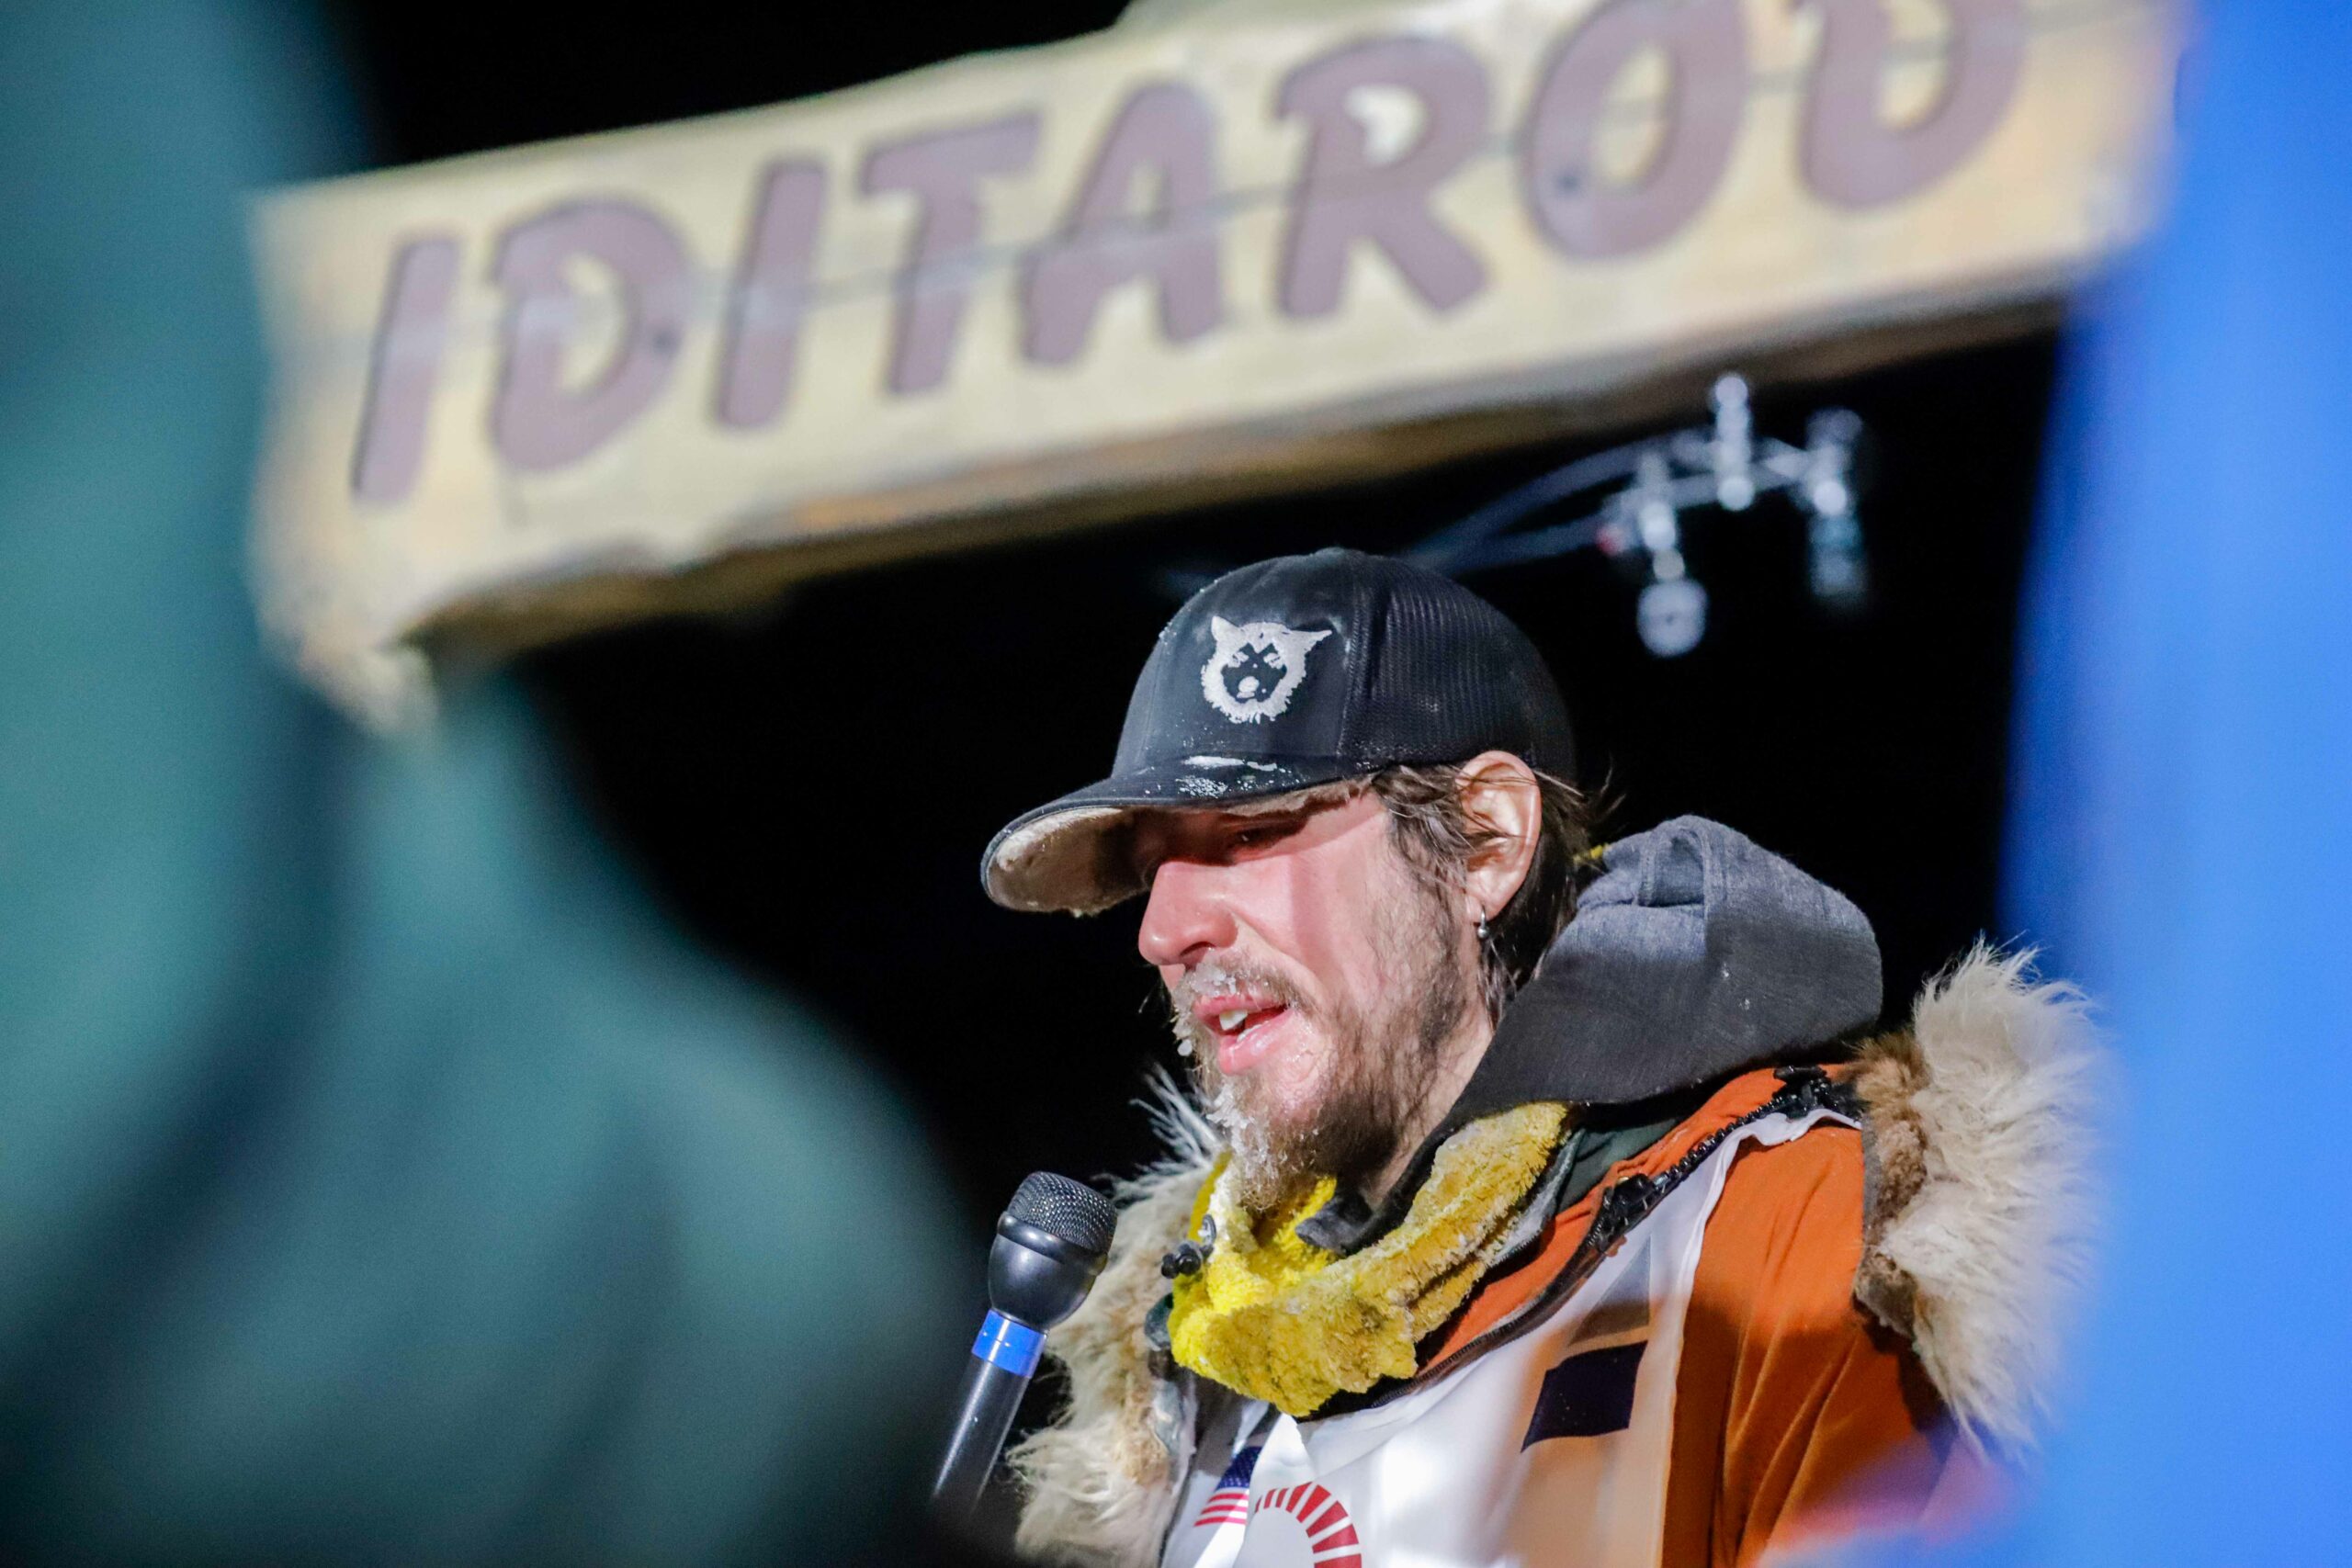 Two Alaska reporters explain the sexual assault allegations against Iditarod musher Brent Sass